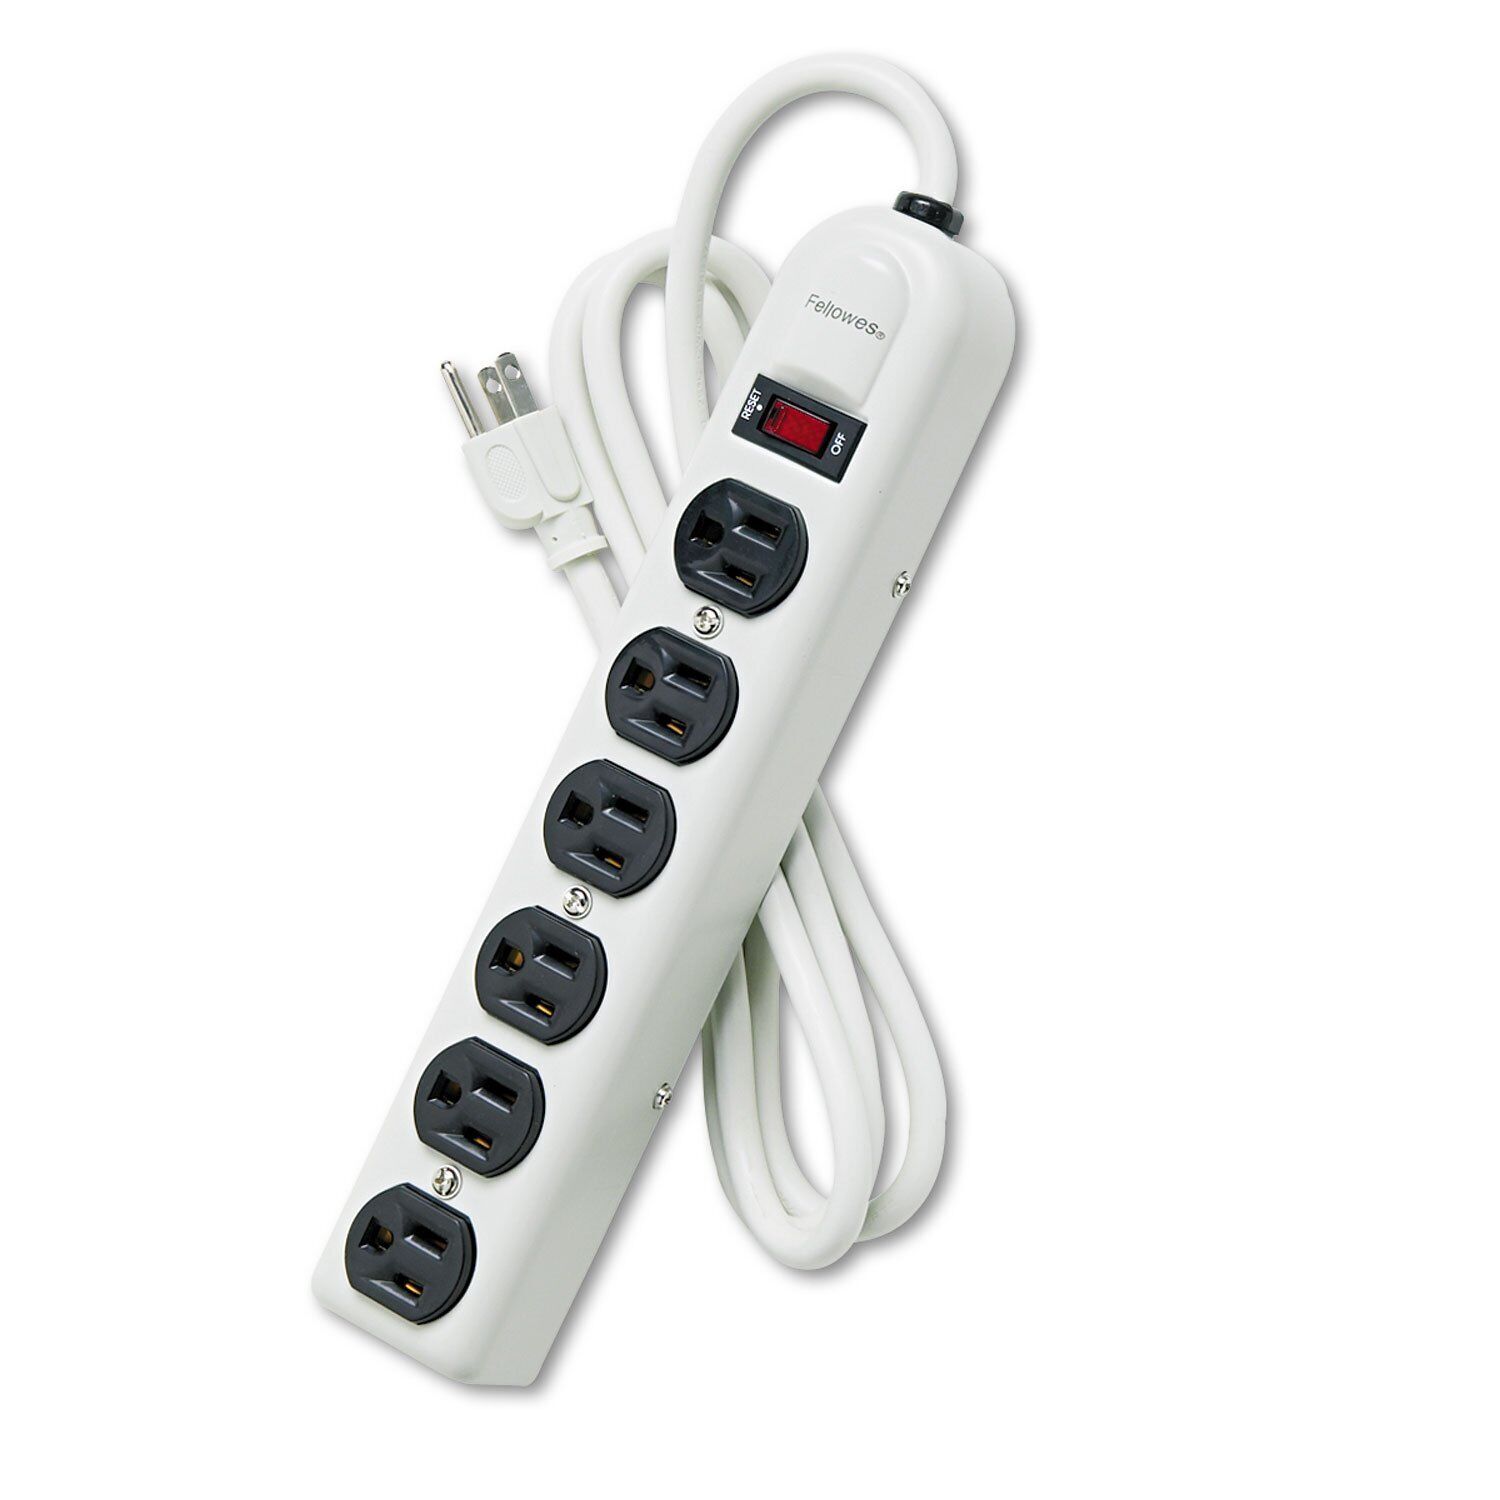 Fellowes 99027 Metal Power Strip with 6 Outlets (99027) Pack of 1, Grey 